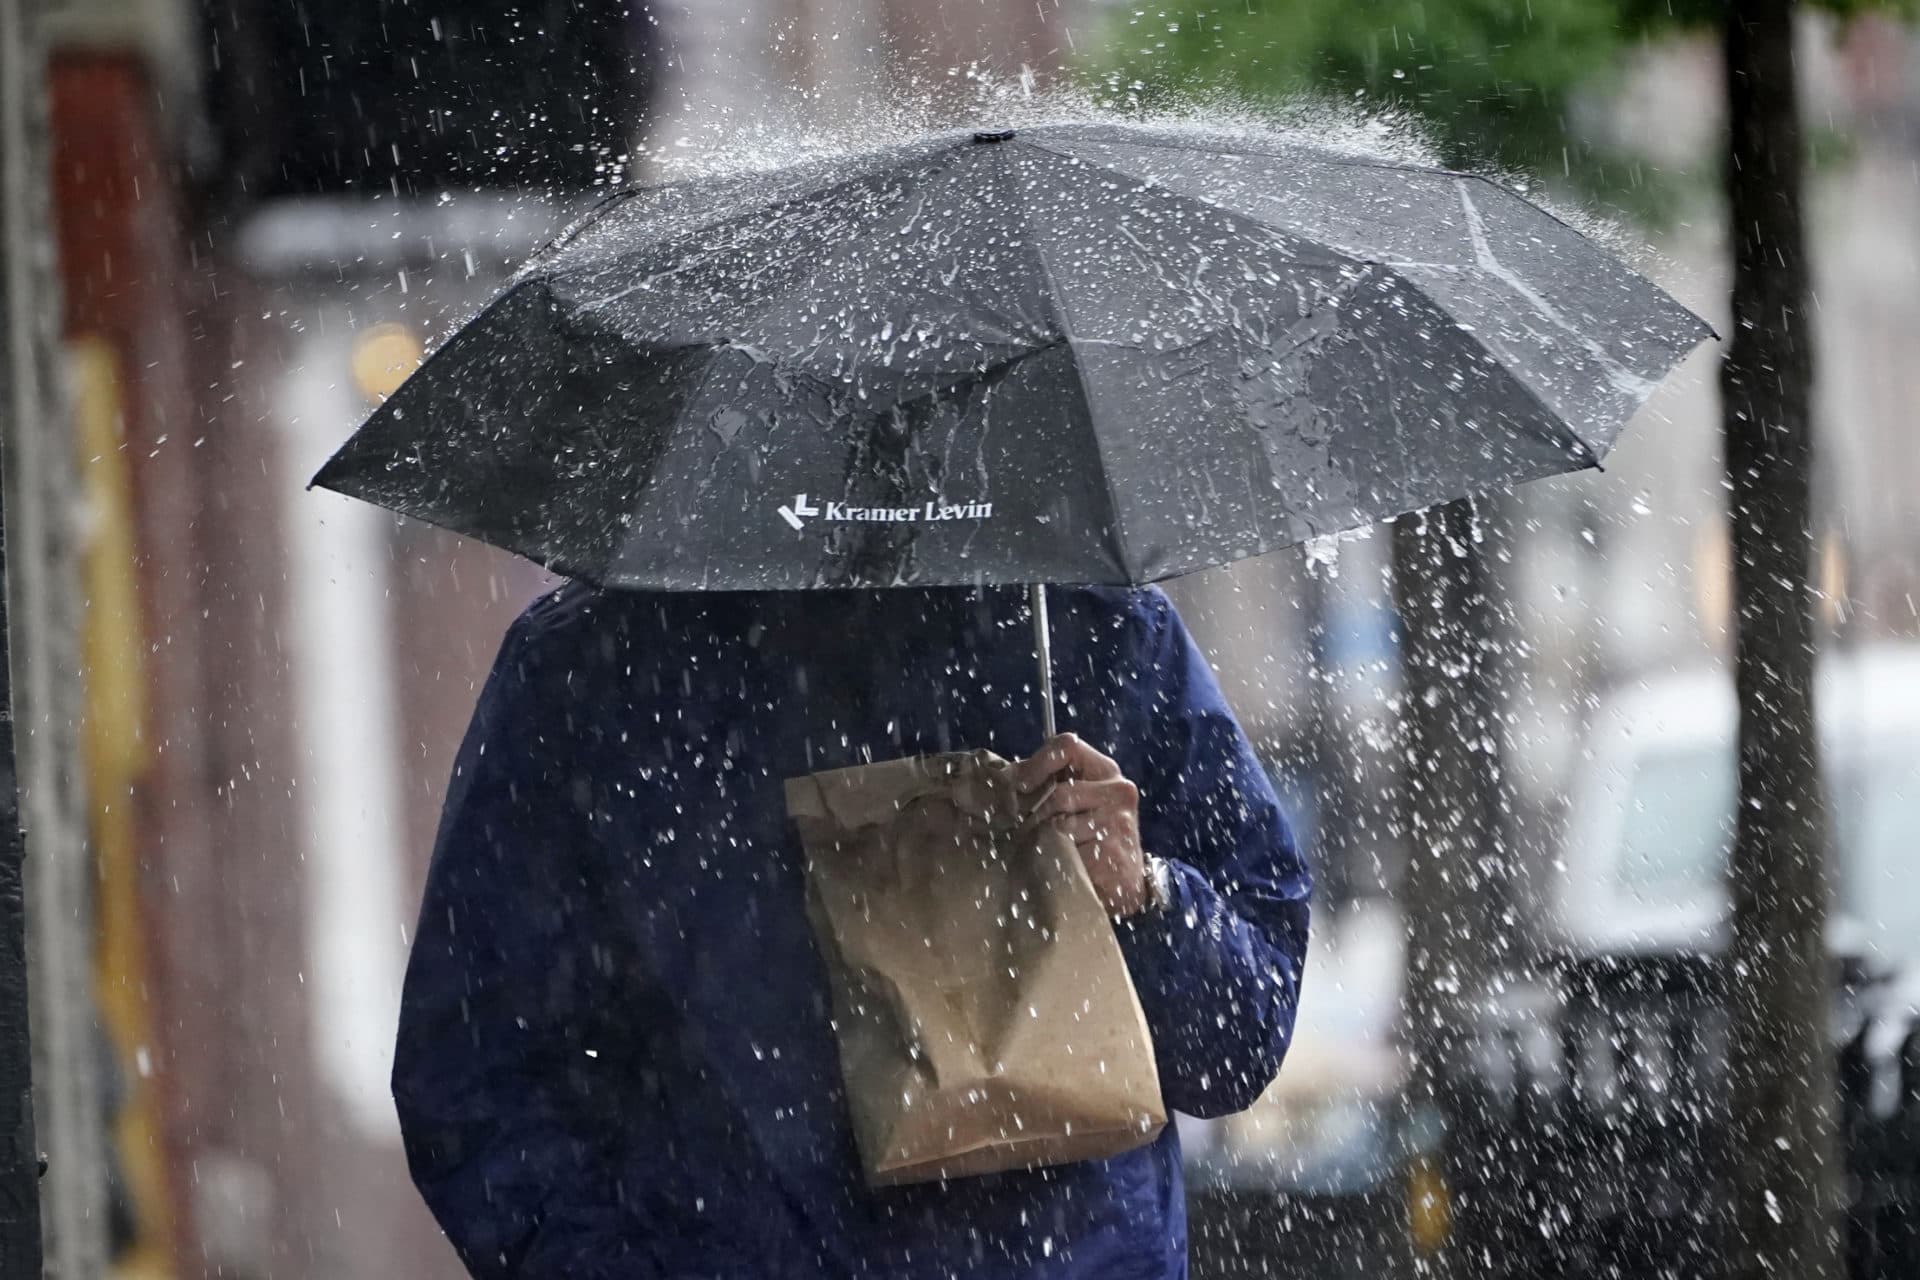 A pedestrian uses an umbrella to shield himself during a downpour from Tropical Storm Elsa, Friday, July 9, 2021, in Portland, Maine. Elsa is the earliest fifth-named storm on record, said Brian McNoldy, a hurricane researcher at the University of Miami. (Robert F. Bukaty/AP)